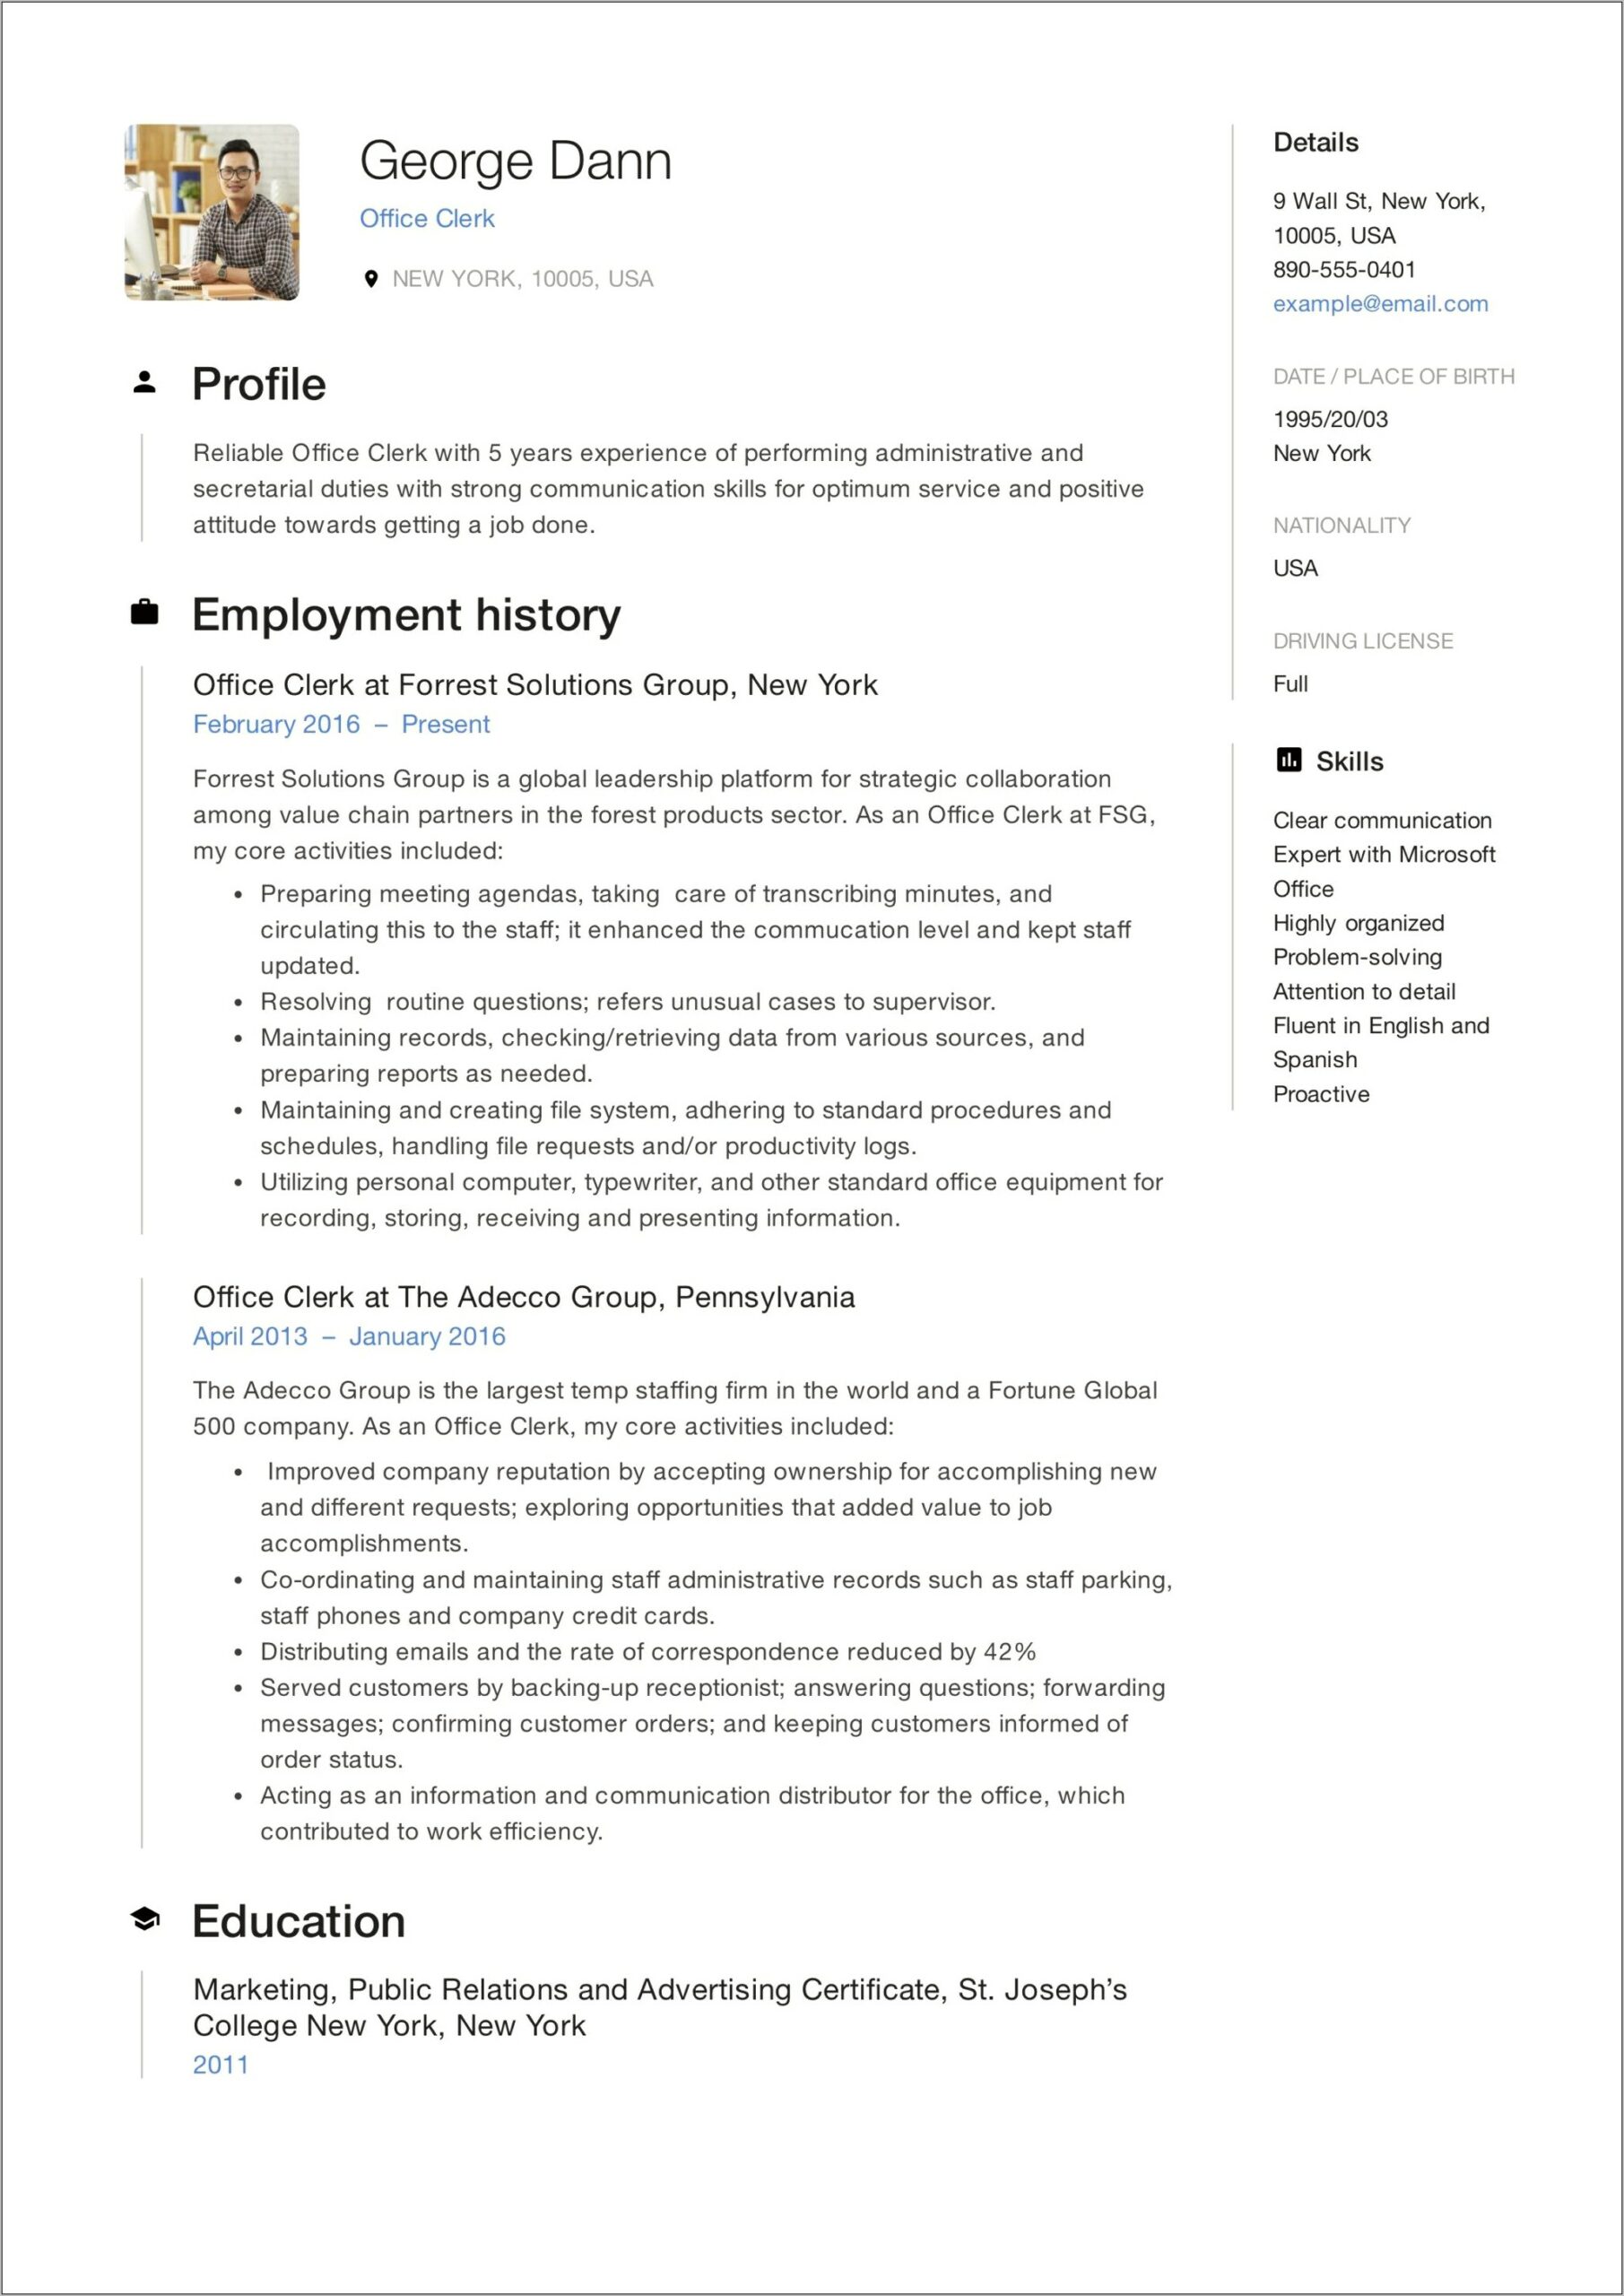 Sample Resume Objectives For Clerical Position